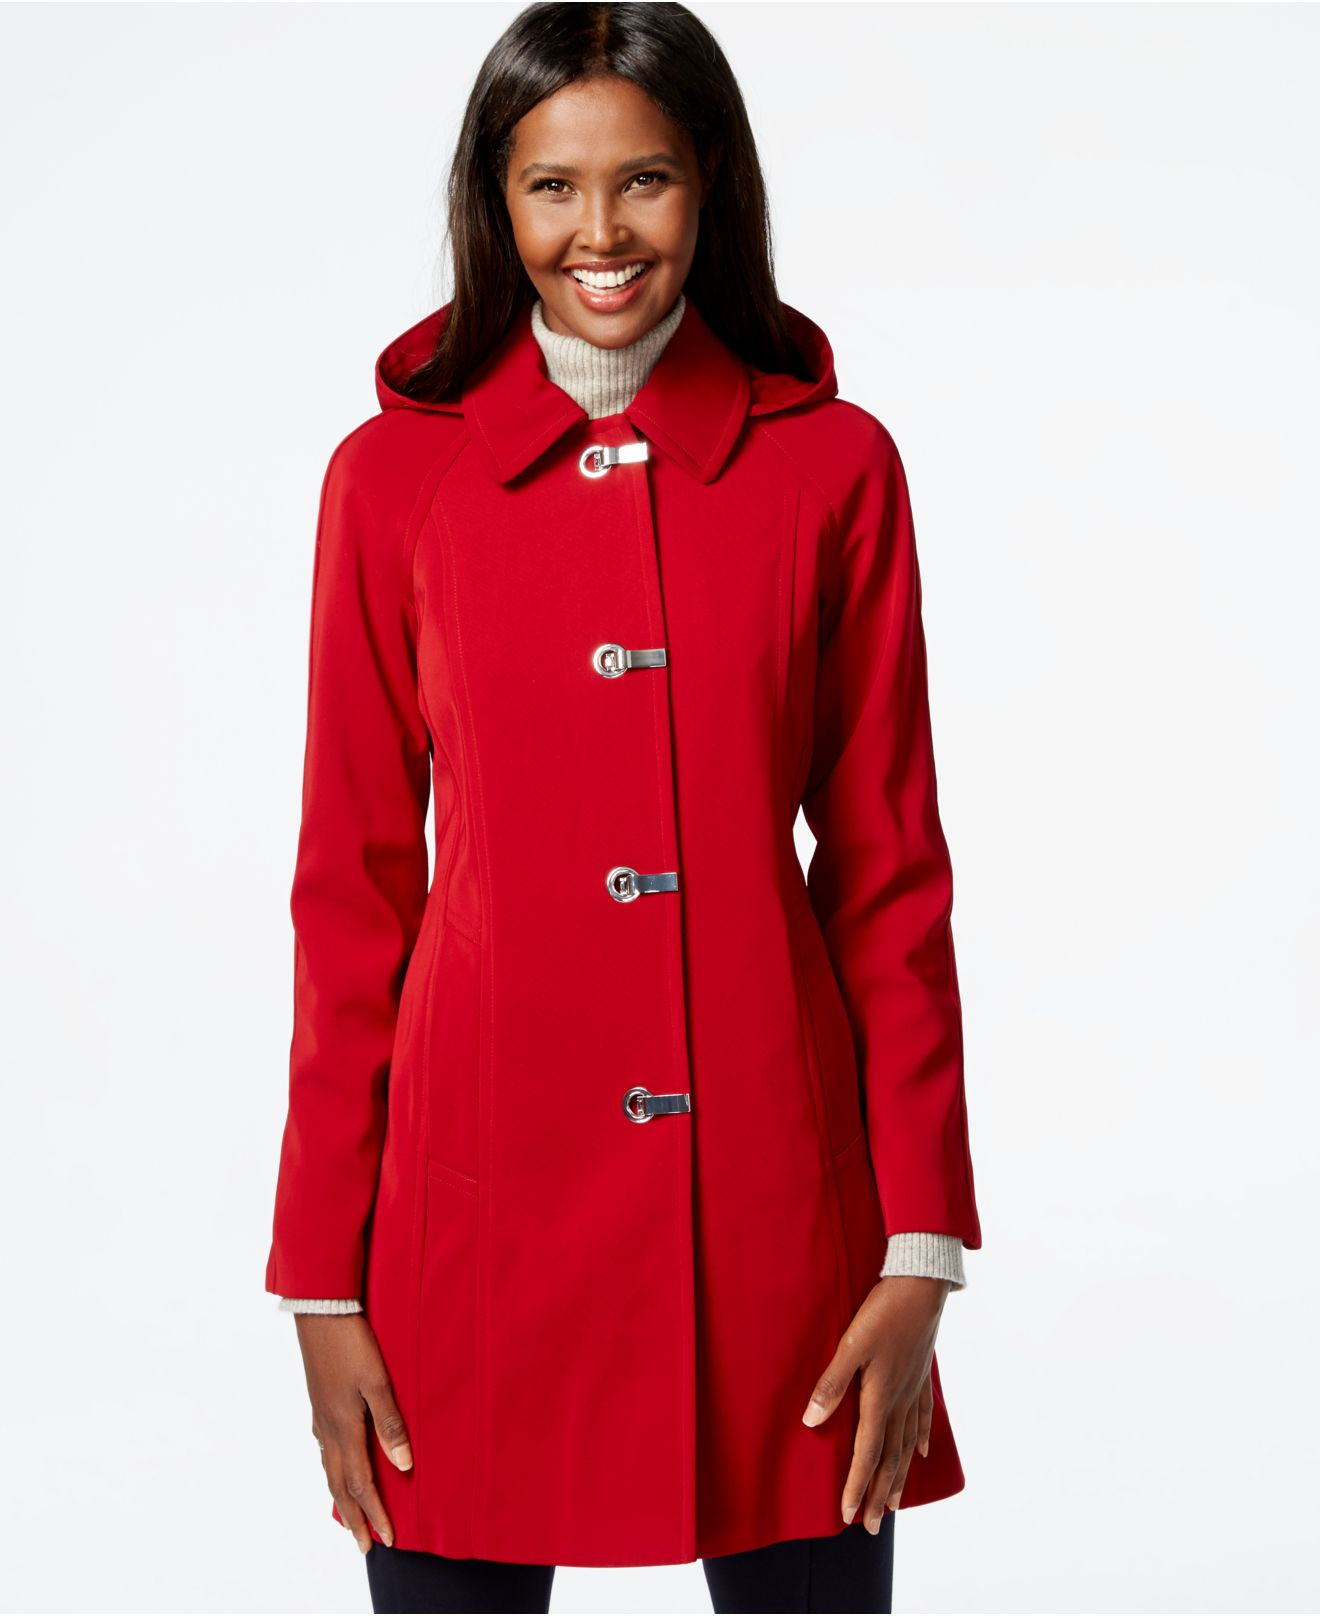 London Fog Synthetic Petite Hooded Clip-front Jacket in Red - Lyst